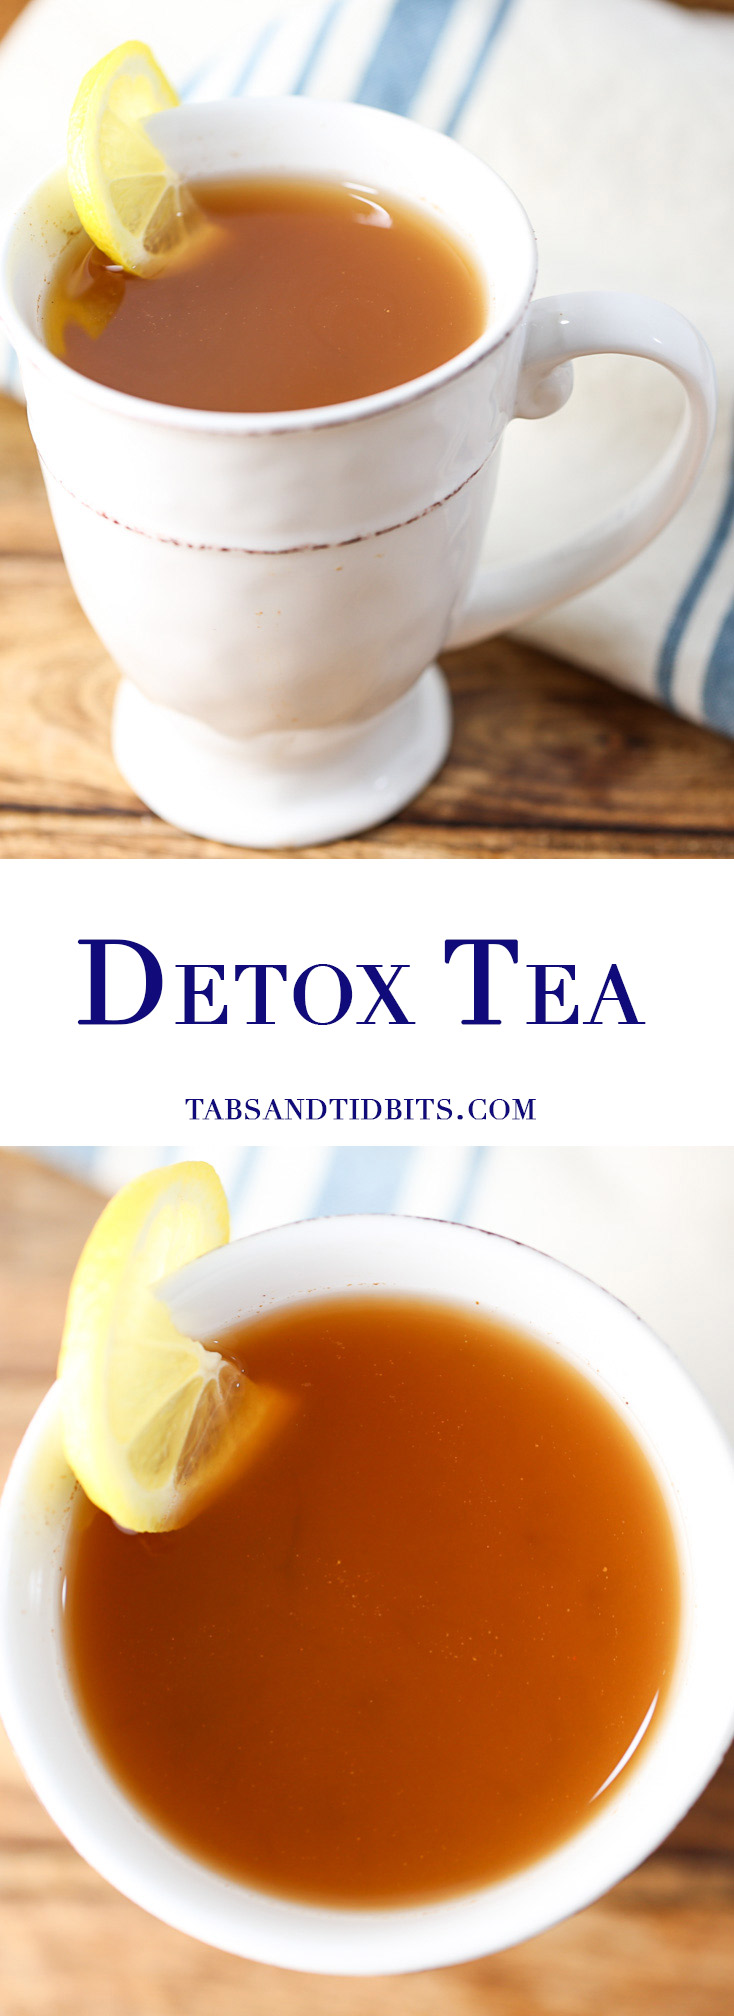 Detox Tea - A healing drink that has cleansing properties with warming cinnamon. 